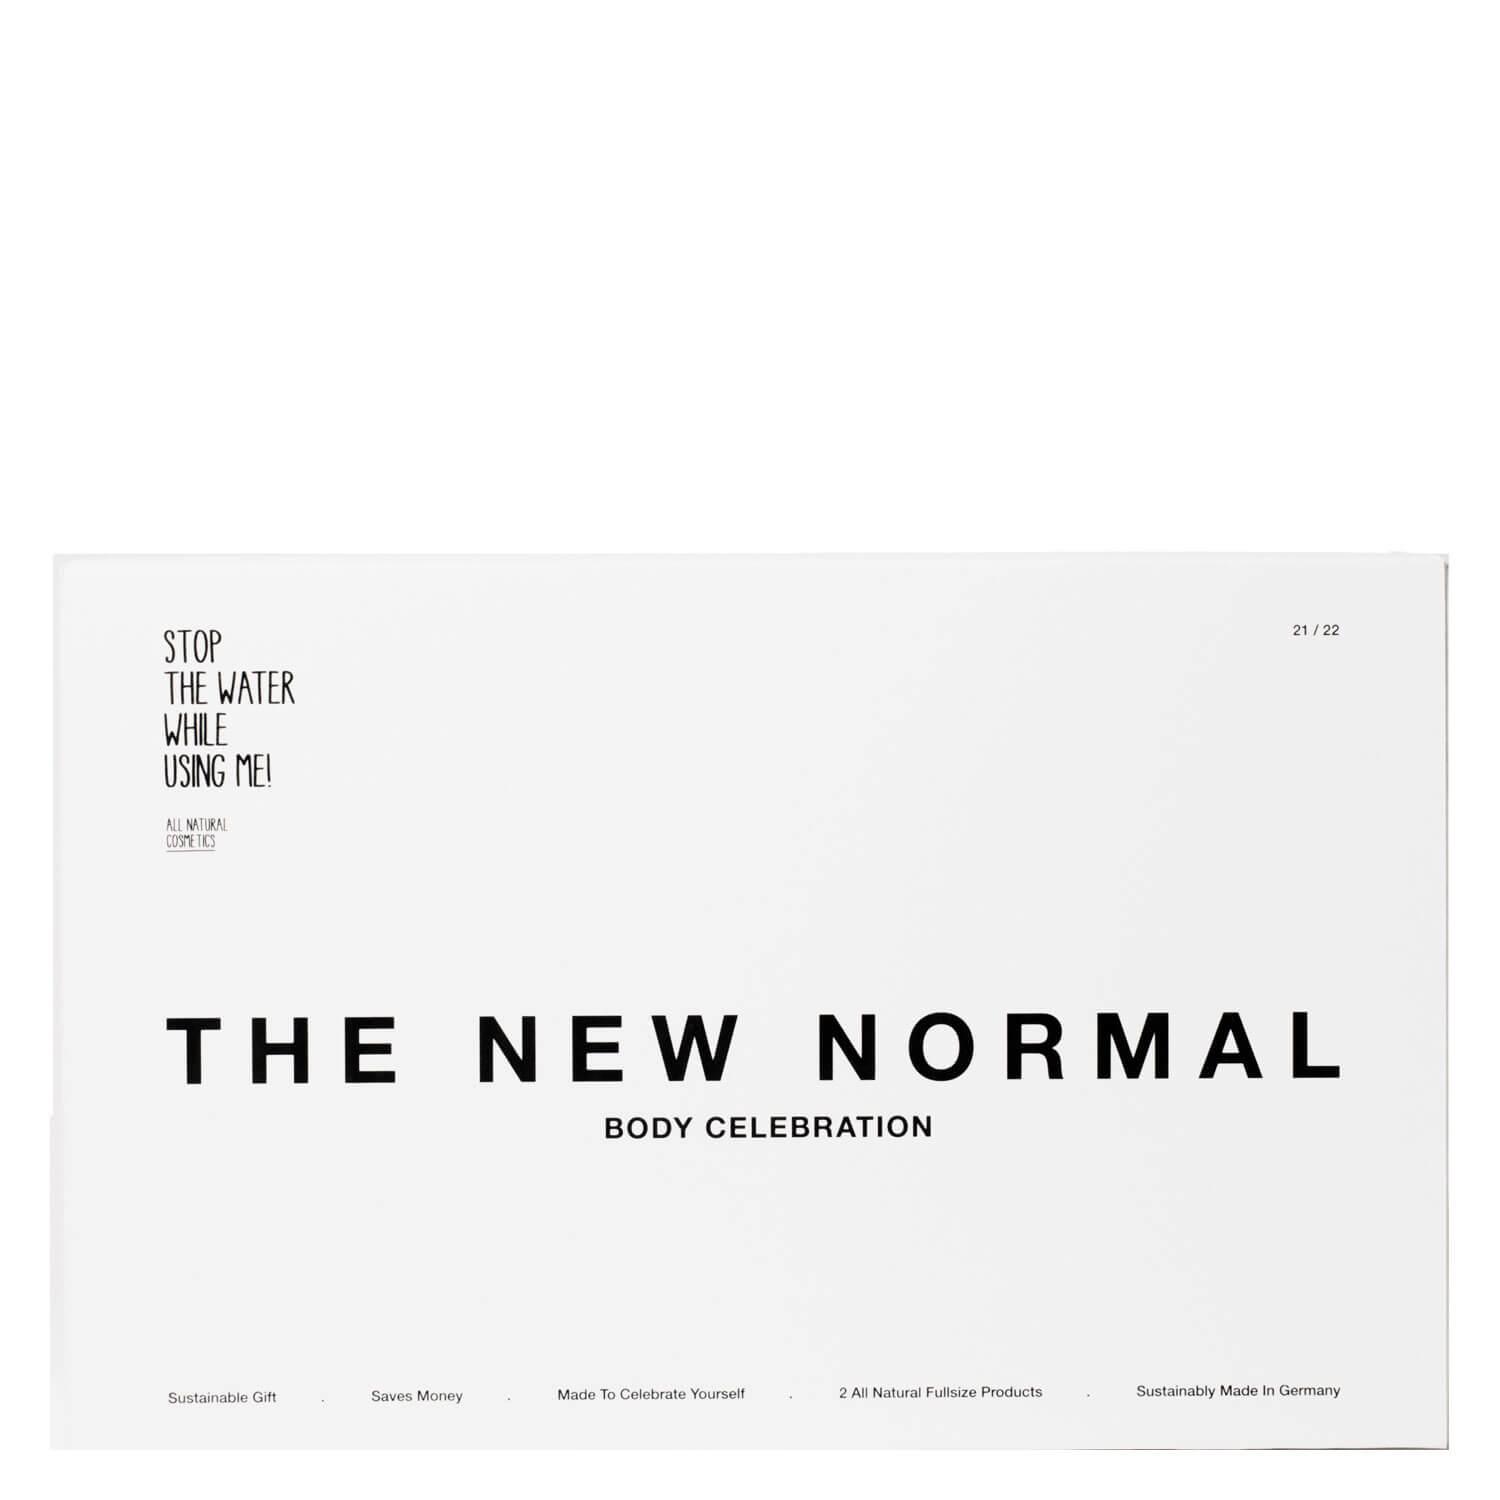 All Natural Body - The New Normal Body Celebration